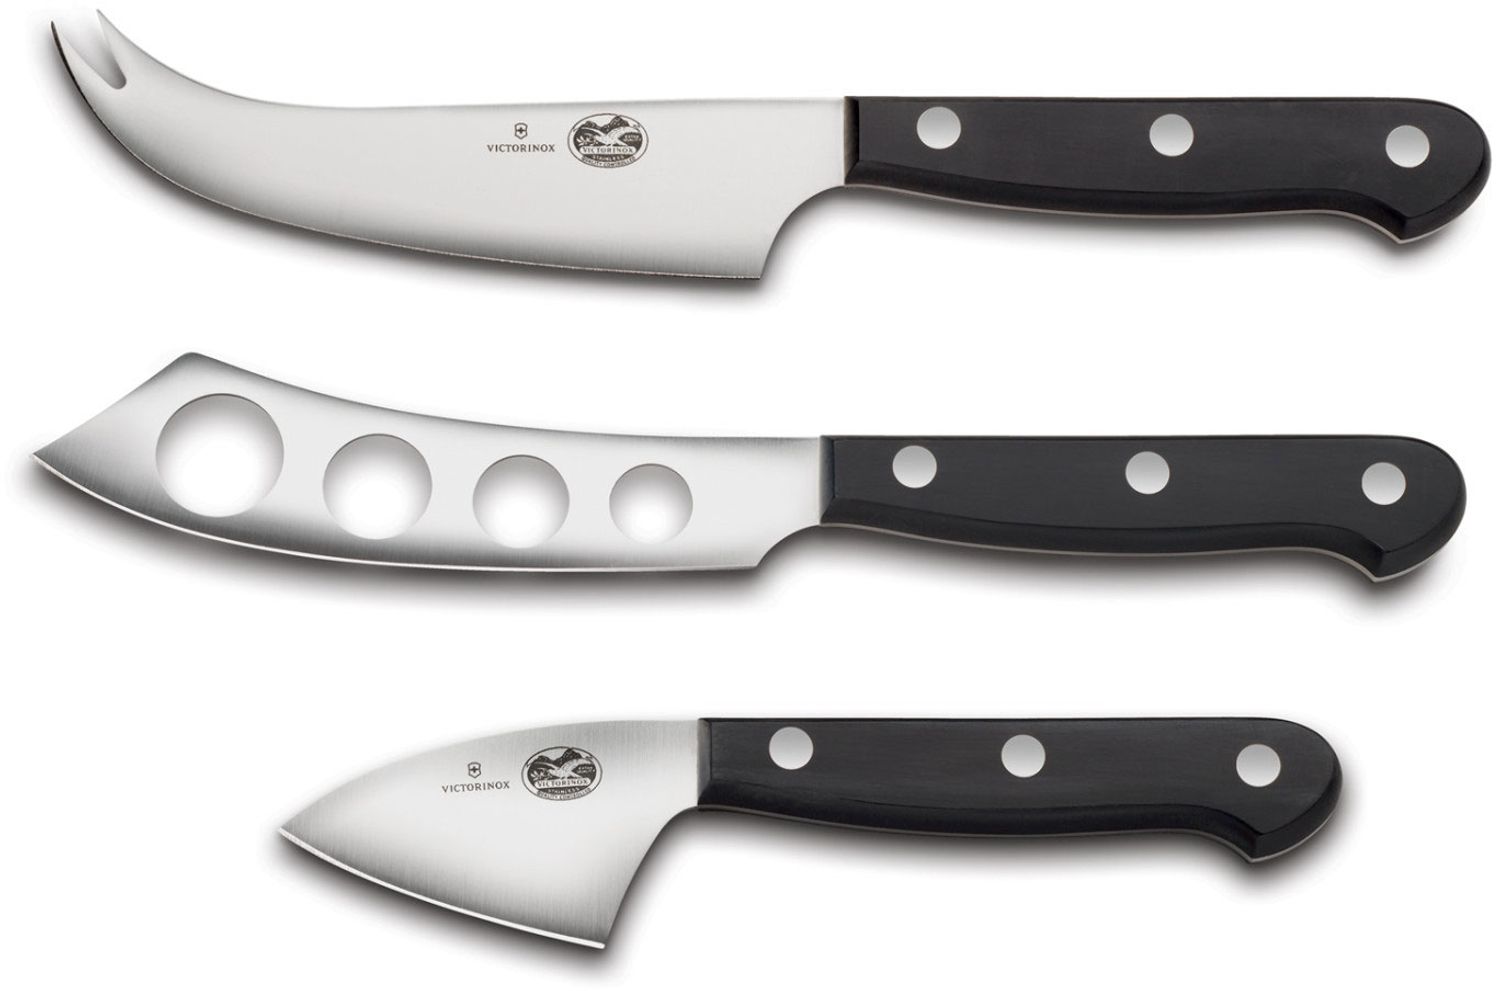 Zwilling J.A. Henckels 3-Piece Cheese Knife Set, Stainless Steel